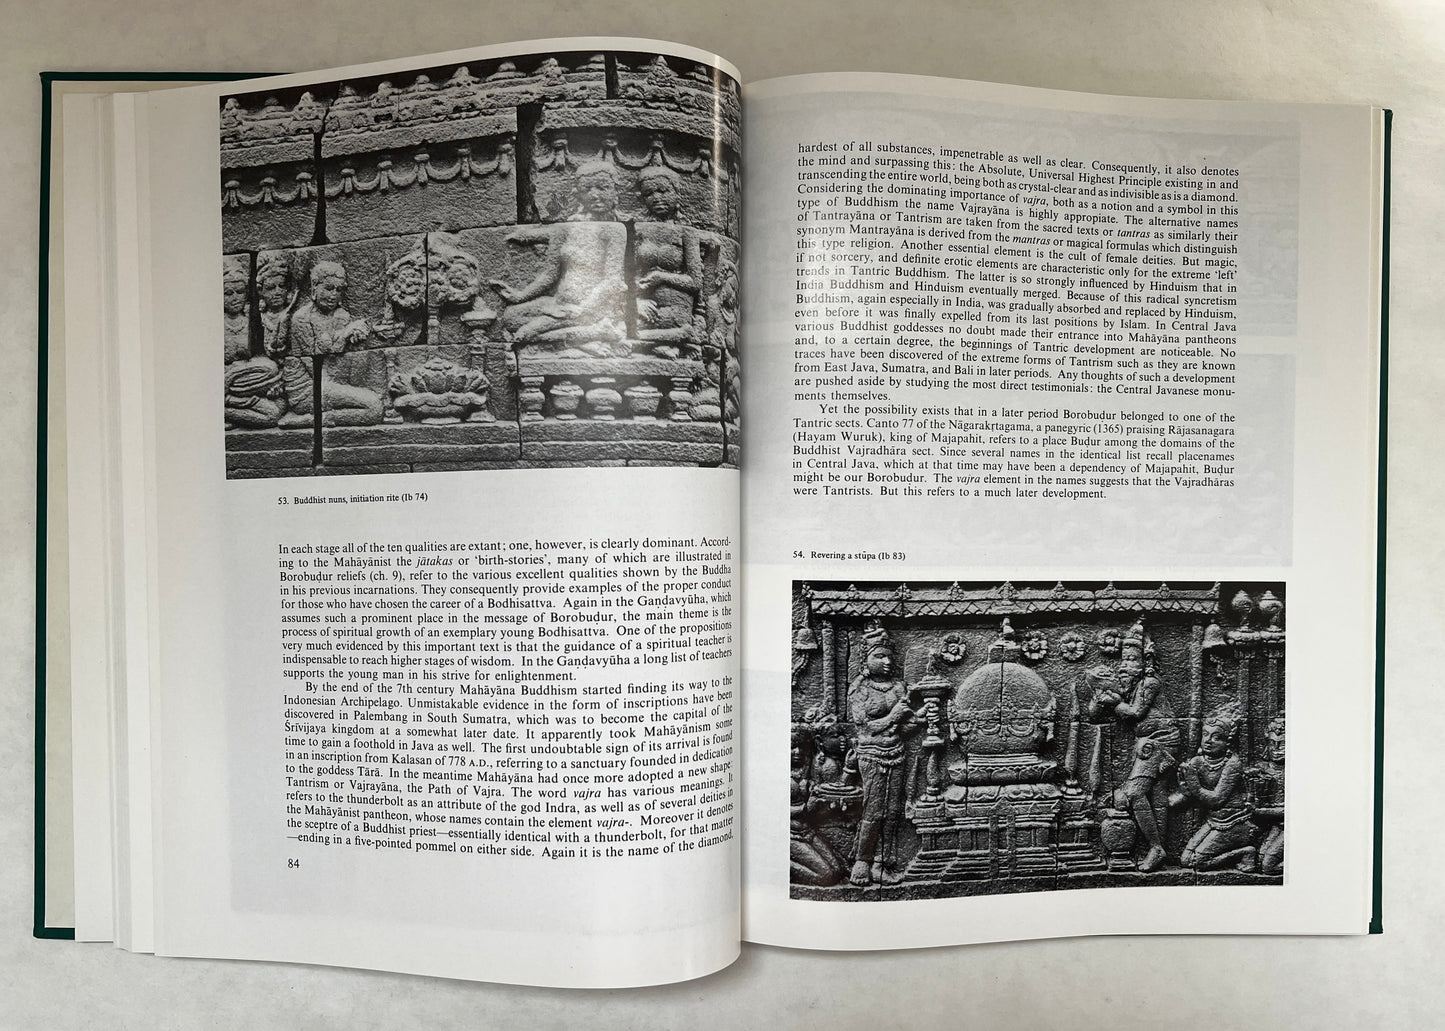 Ageless Borobudur: Buddhist Mystery in Stone, Decay and Restoration, Mendut and Pawon, Folklife in Ancient Java